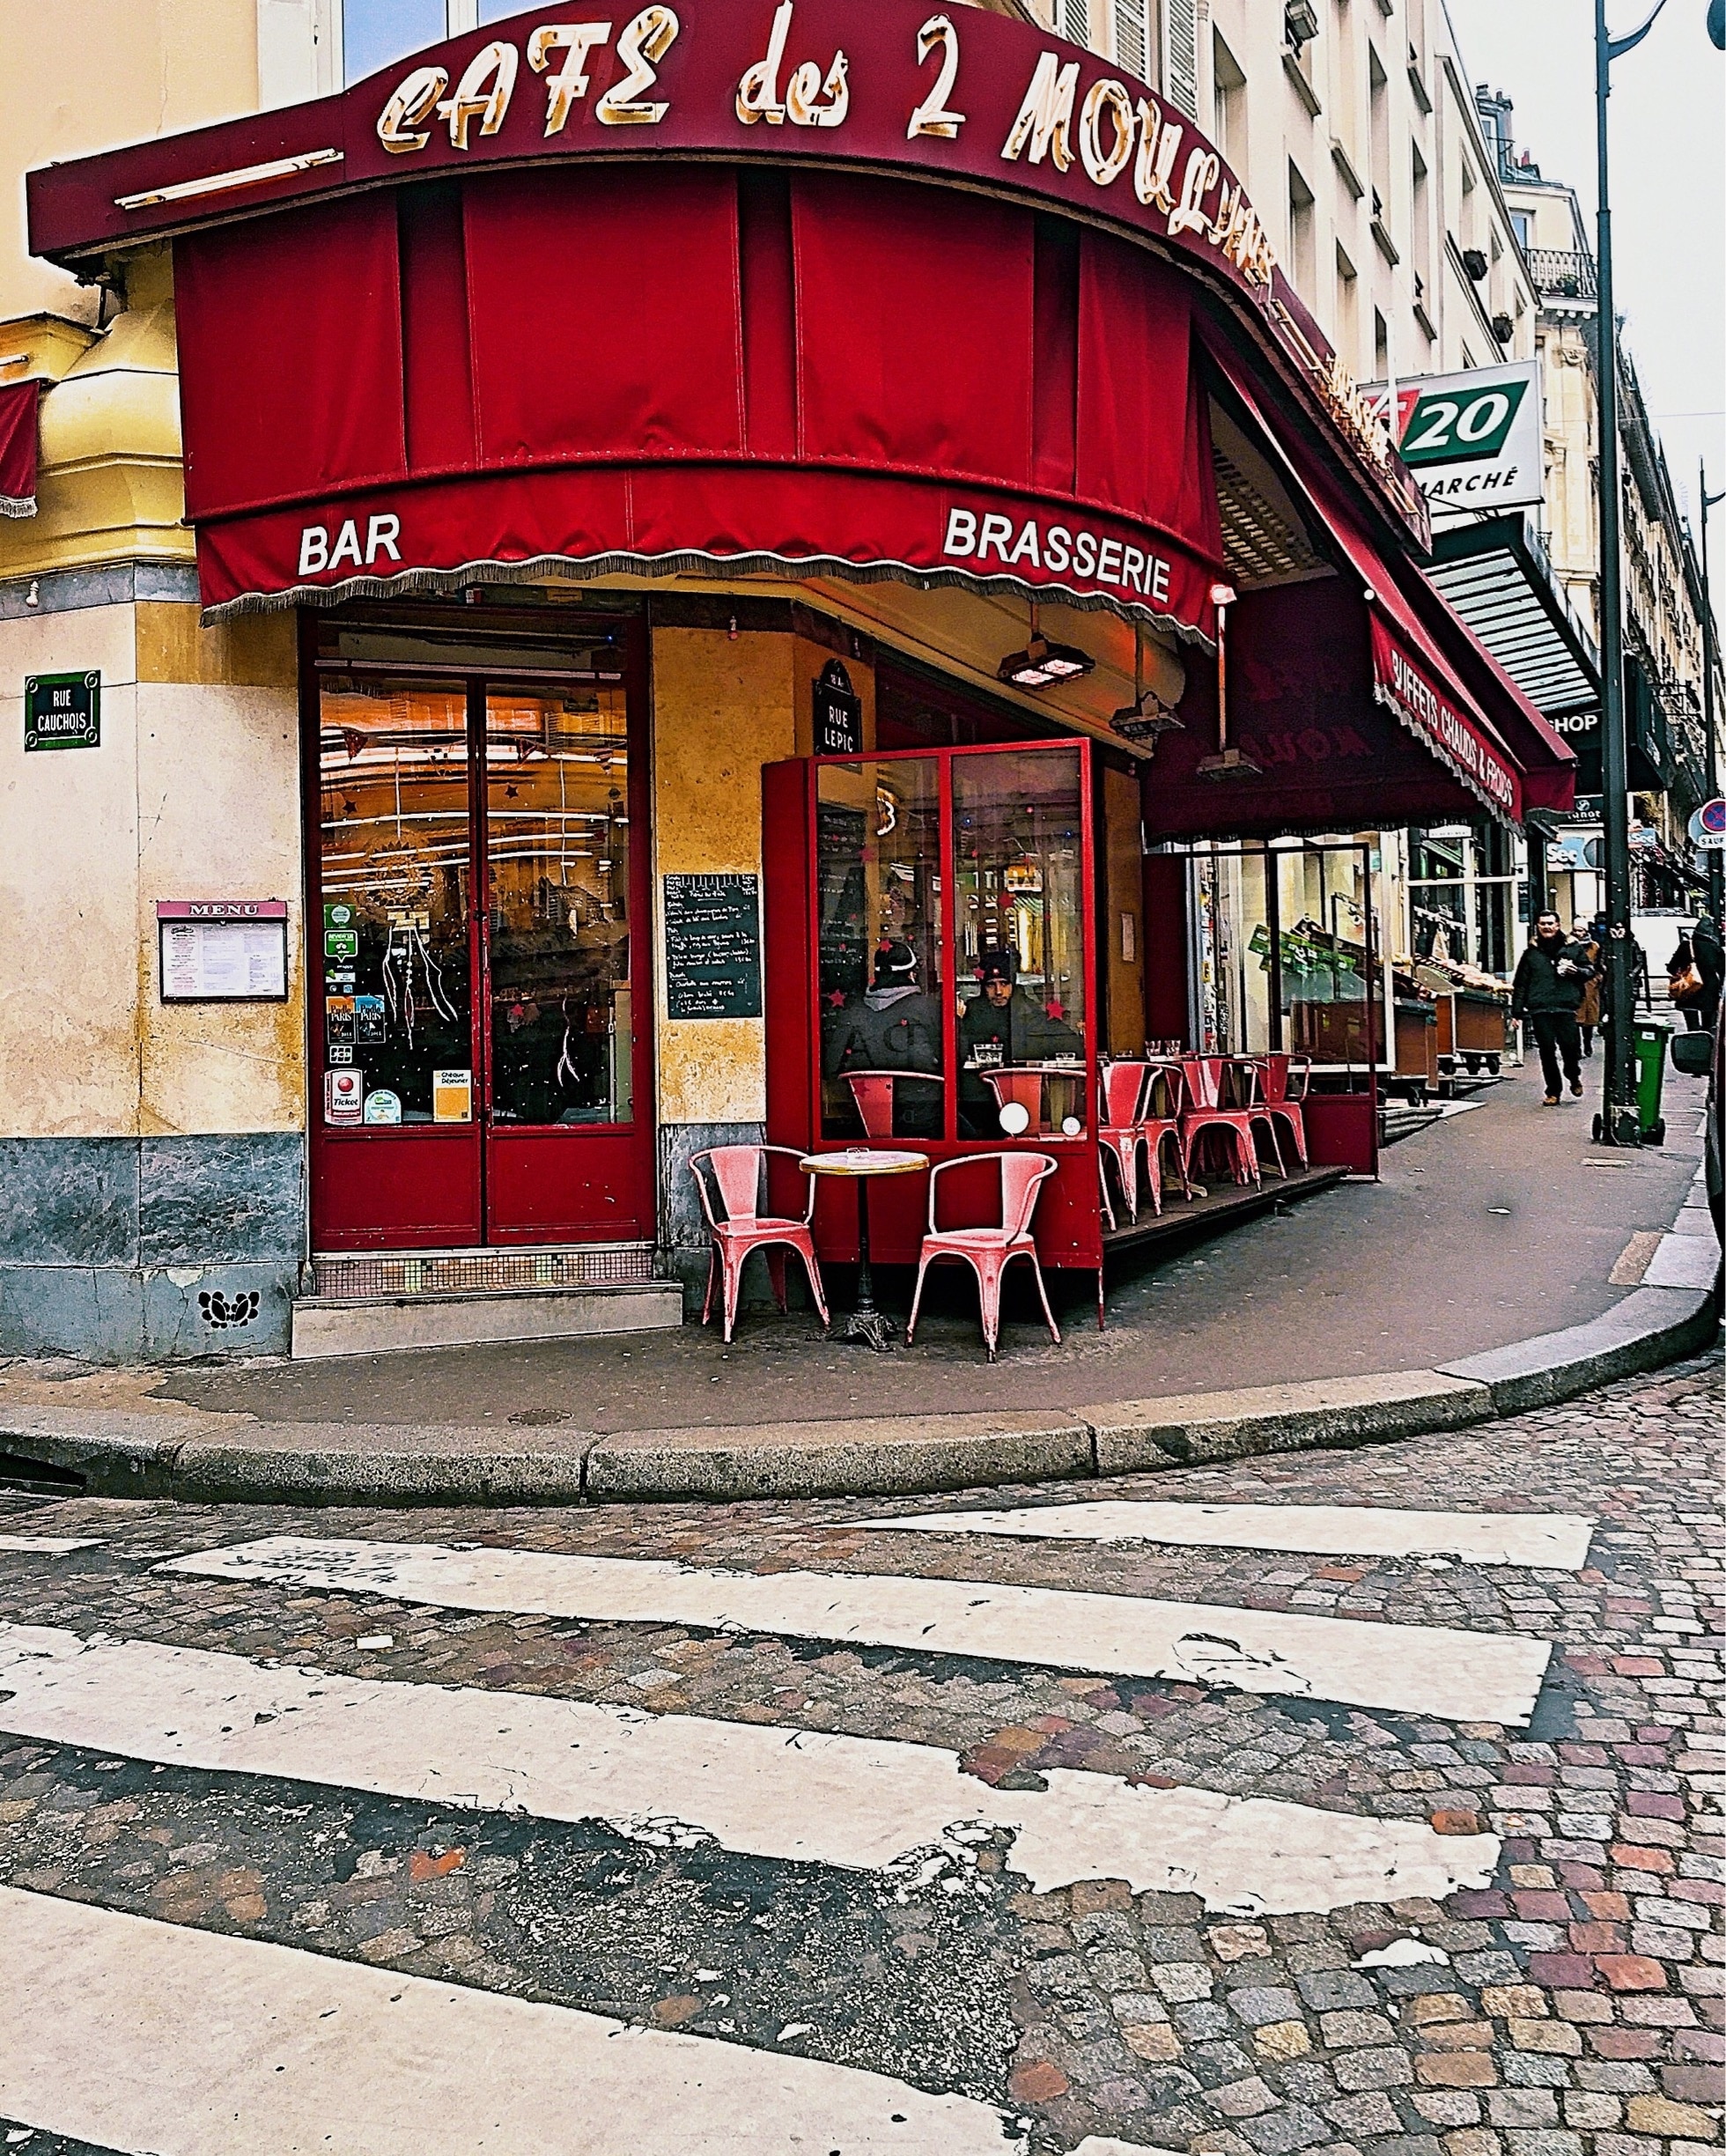 If you' love the film "Amélie" you will adore the Cafe des Deux Moulins. It is Amélie Poulain's charming #red workplace and the interior looks just like that of the movie minus the cigarette counter. Cozy and cute, it makes for a great stop. And of course, the creme brûlée is delicious!